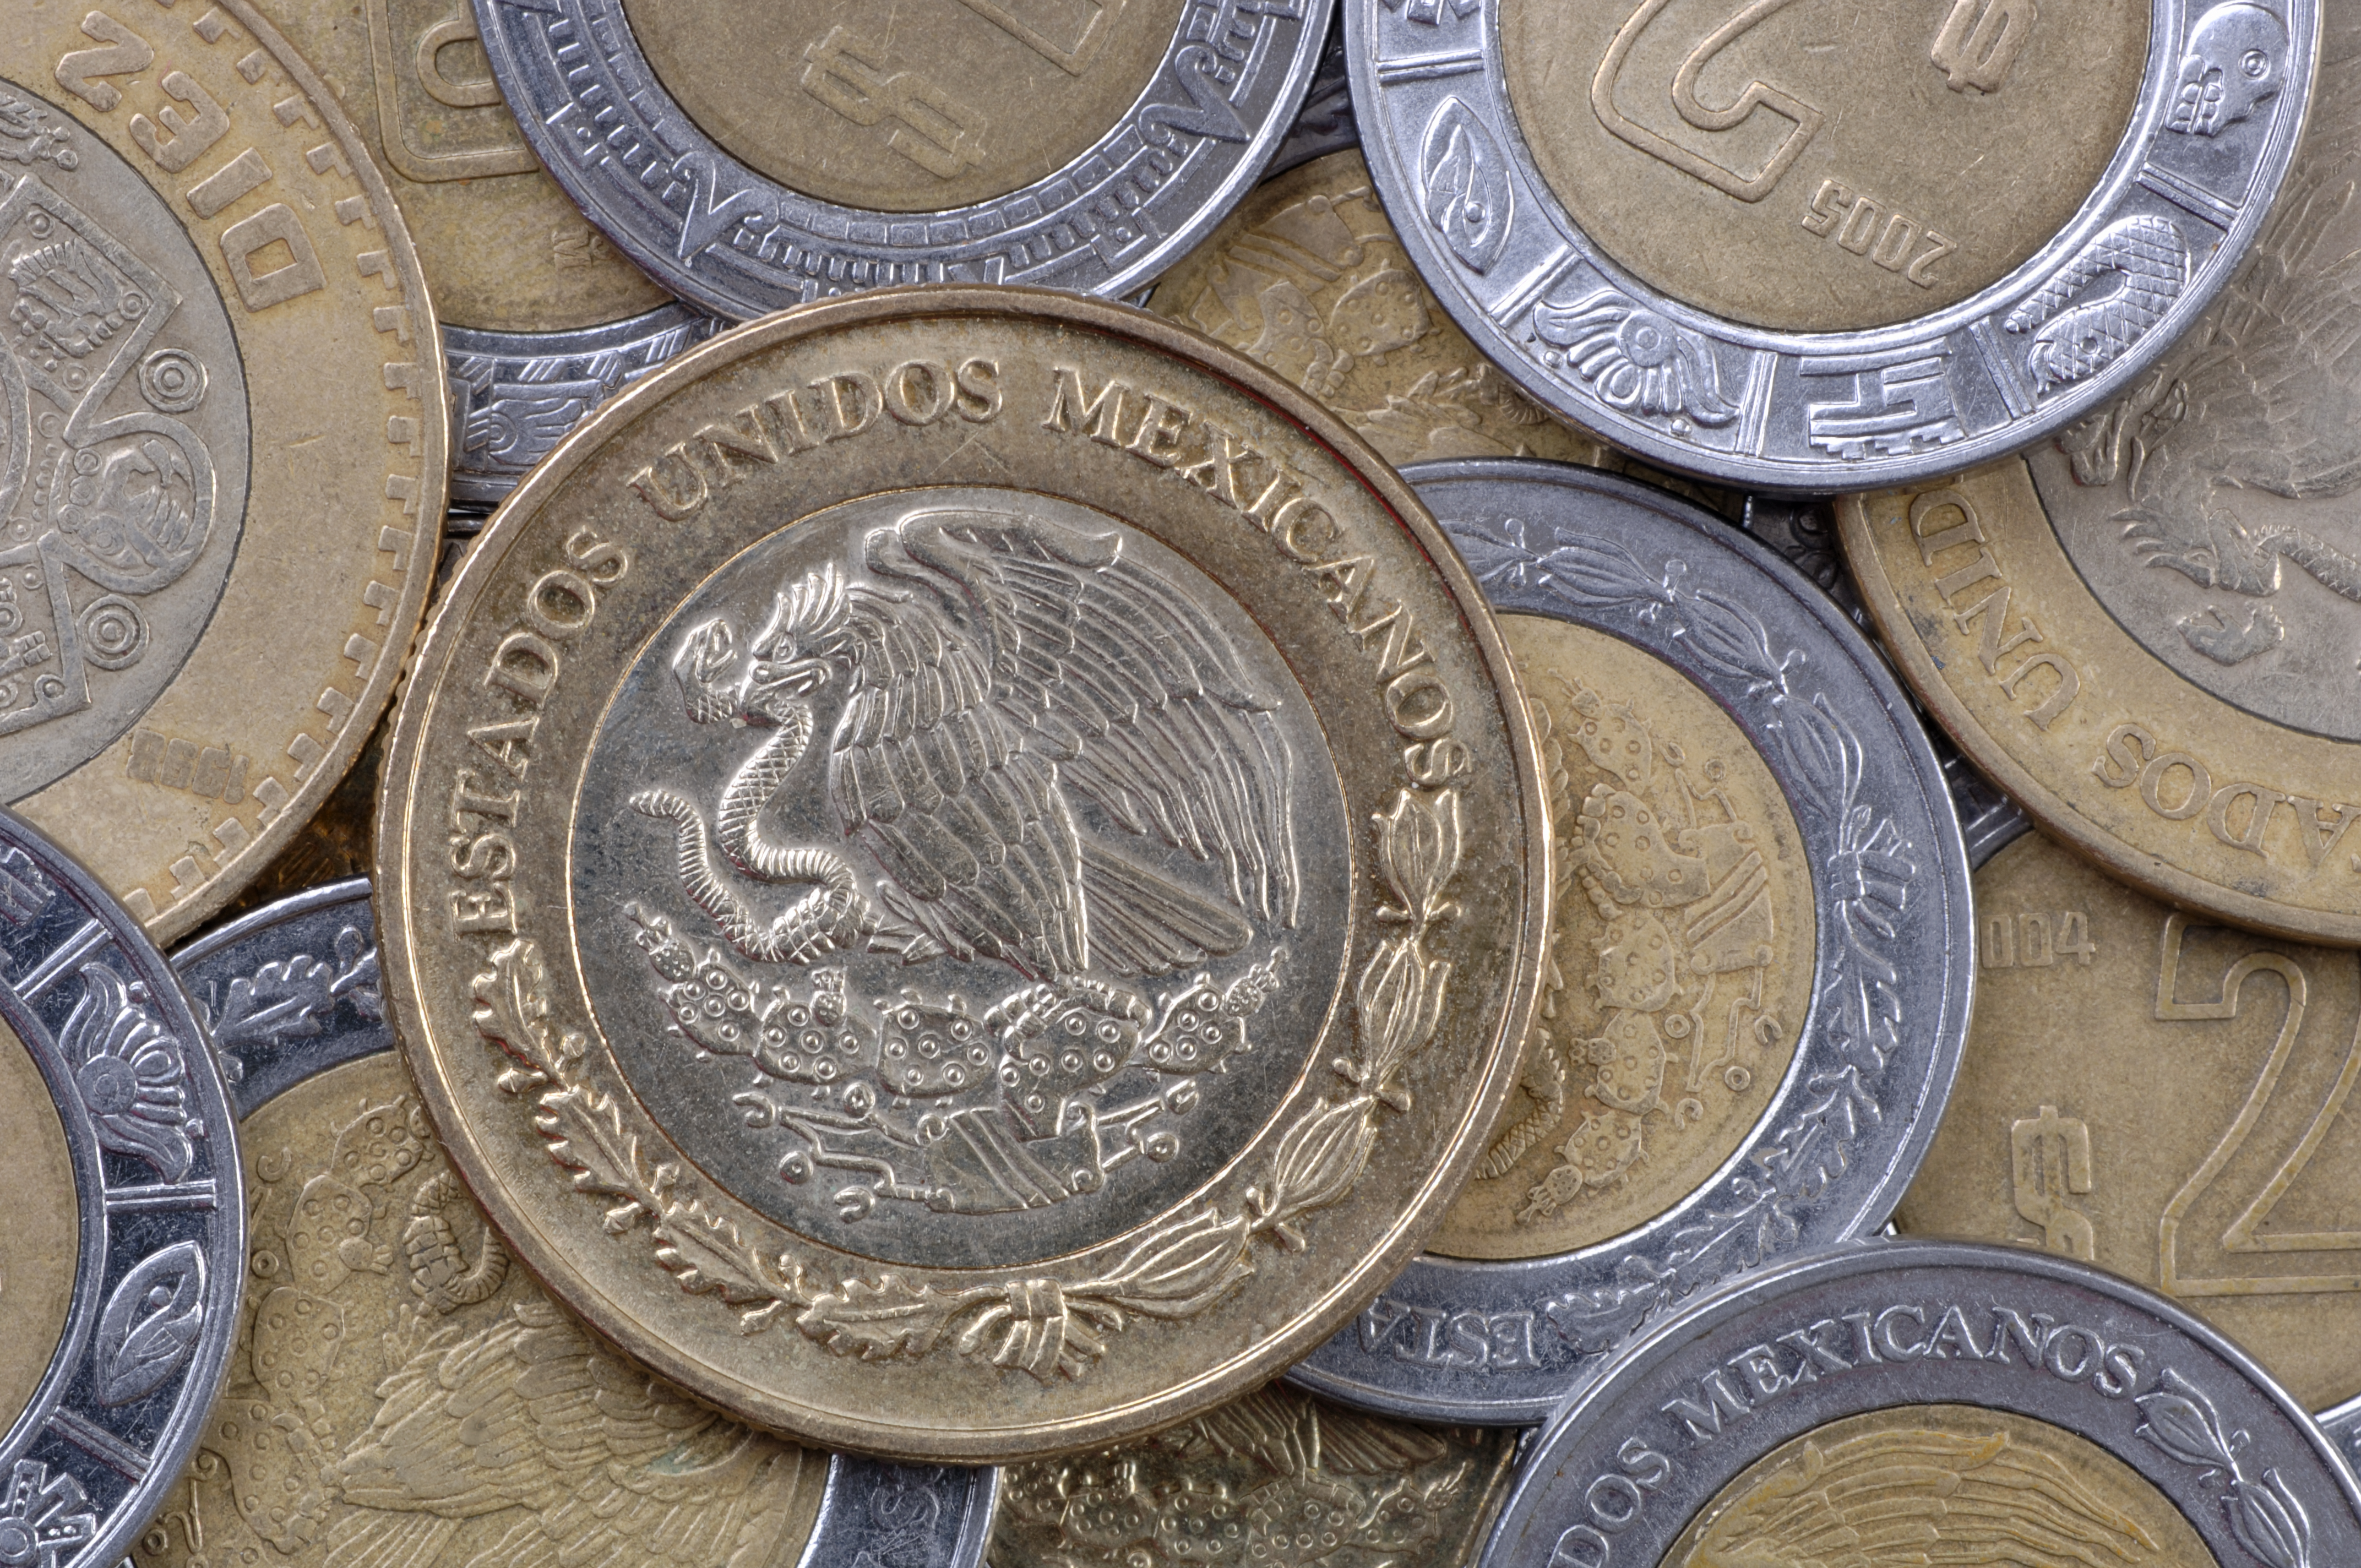 Pile of Mexican Peso coins